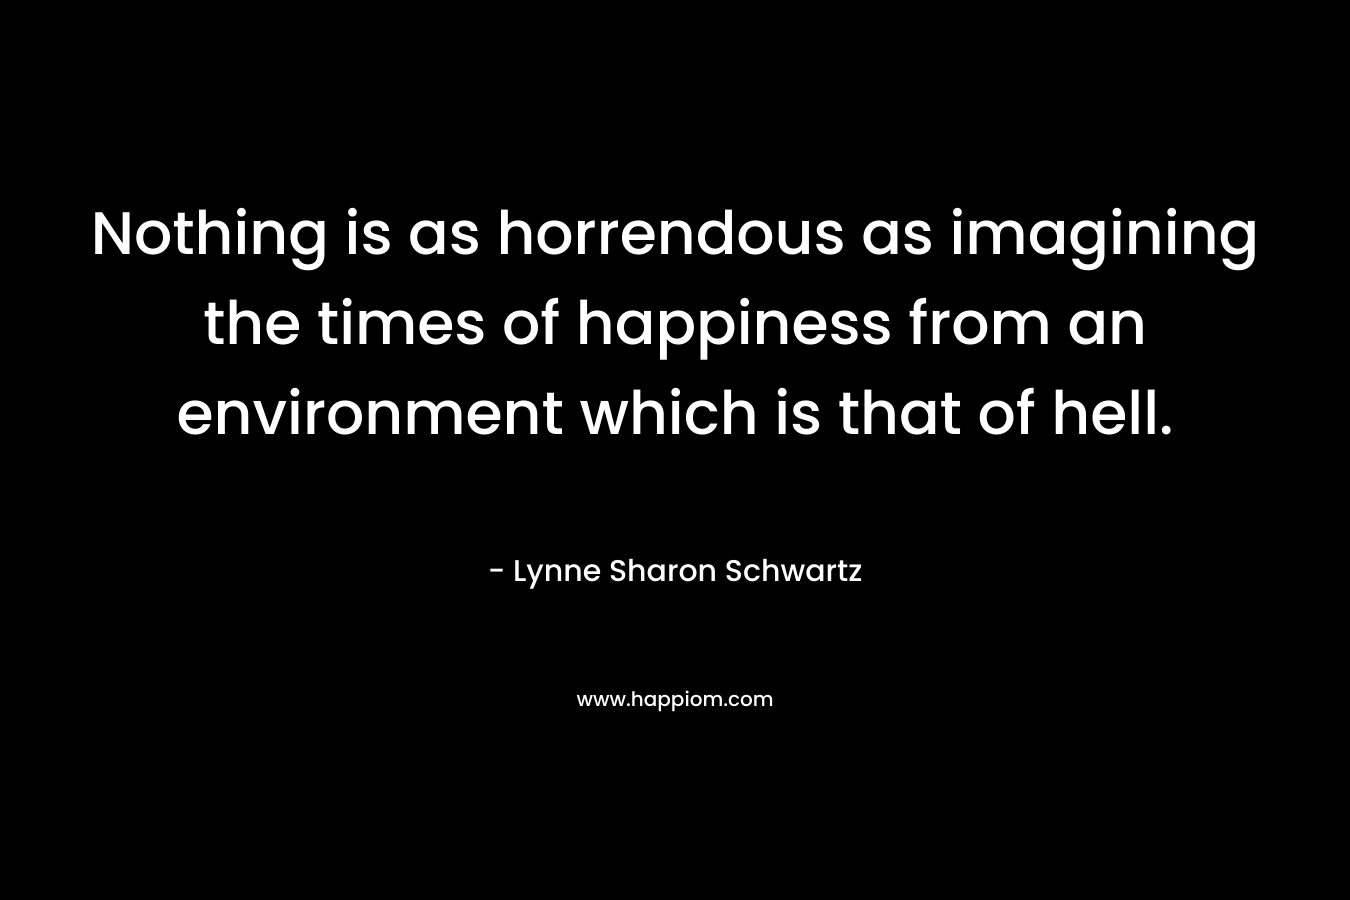 Nothing is as horrendous as imagining the times of happiness from an environment which is that of hell. – Lynne Sharon Schwartz